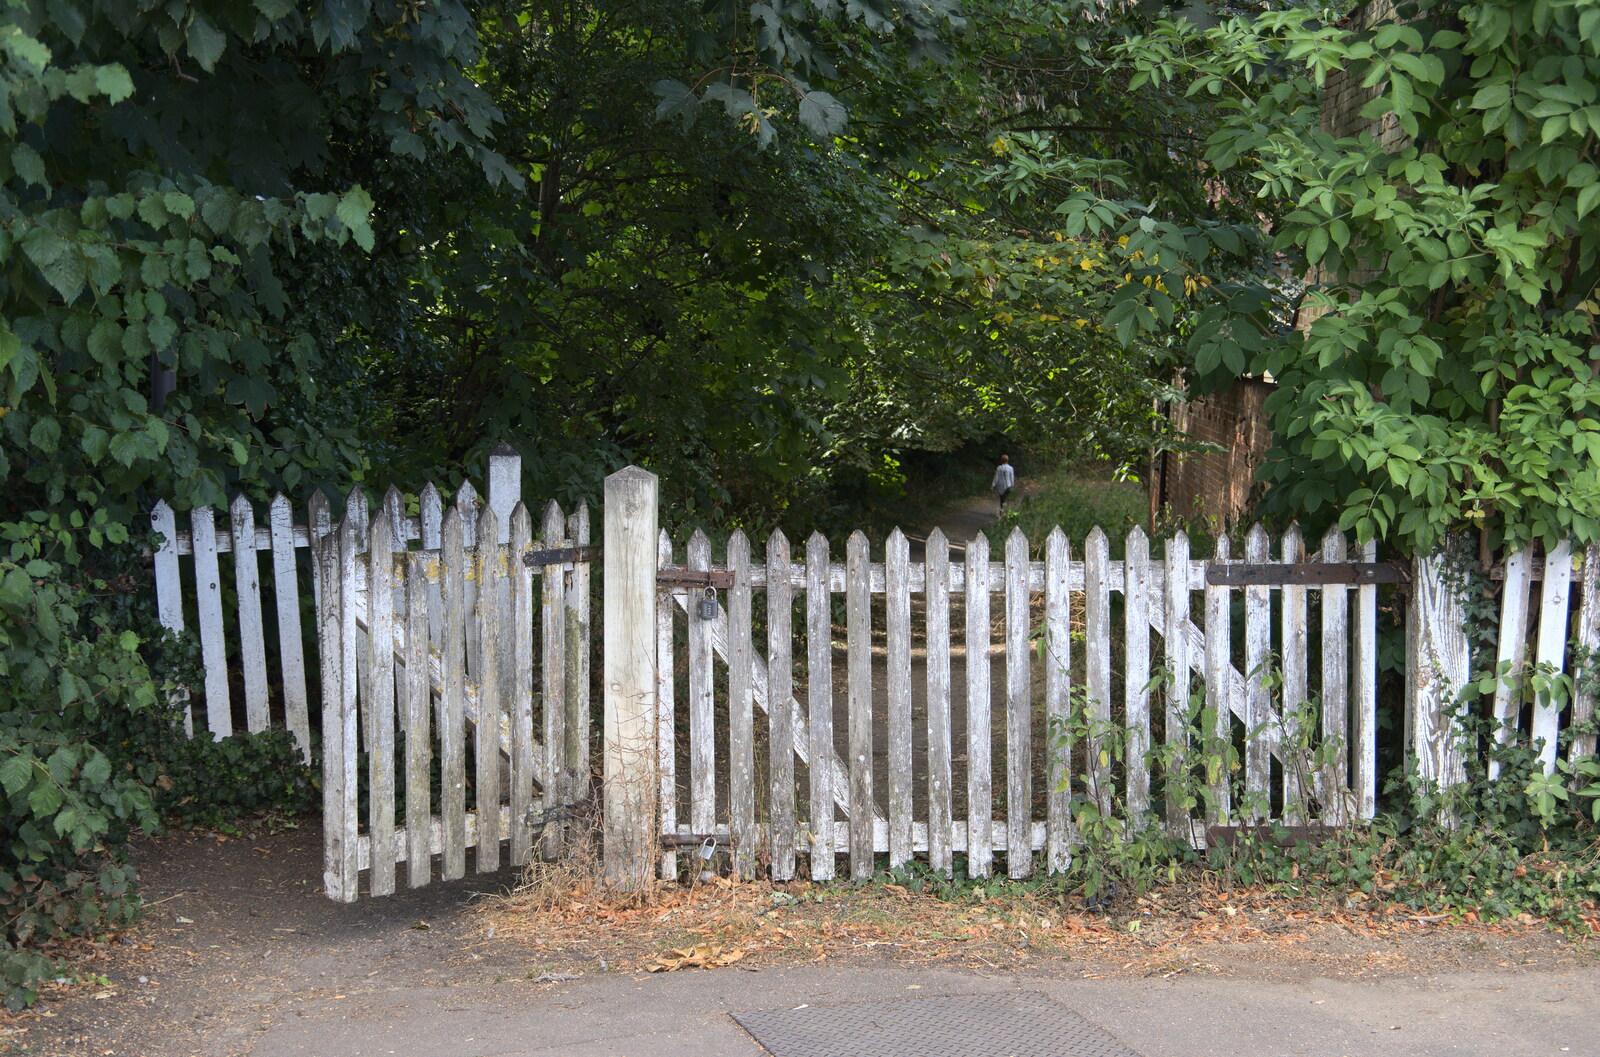 A Trip to Framlingham, Suffolk - 28th July 2022: A well-worn picket fence and a path somewhere